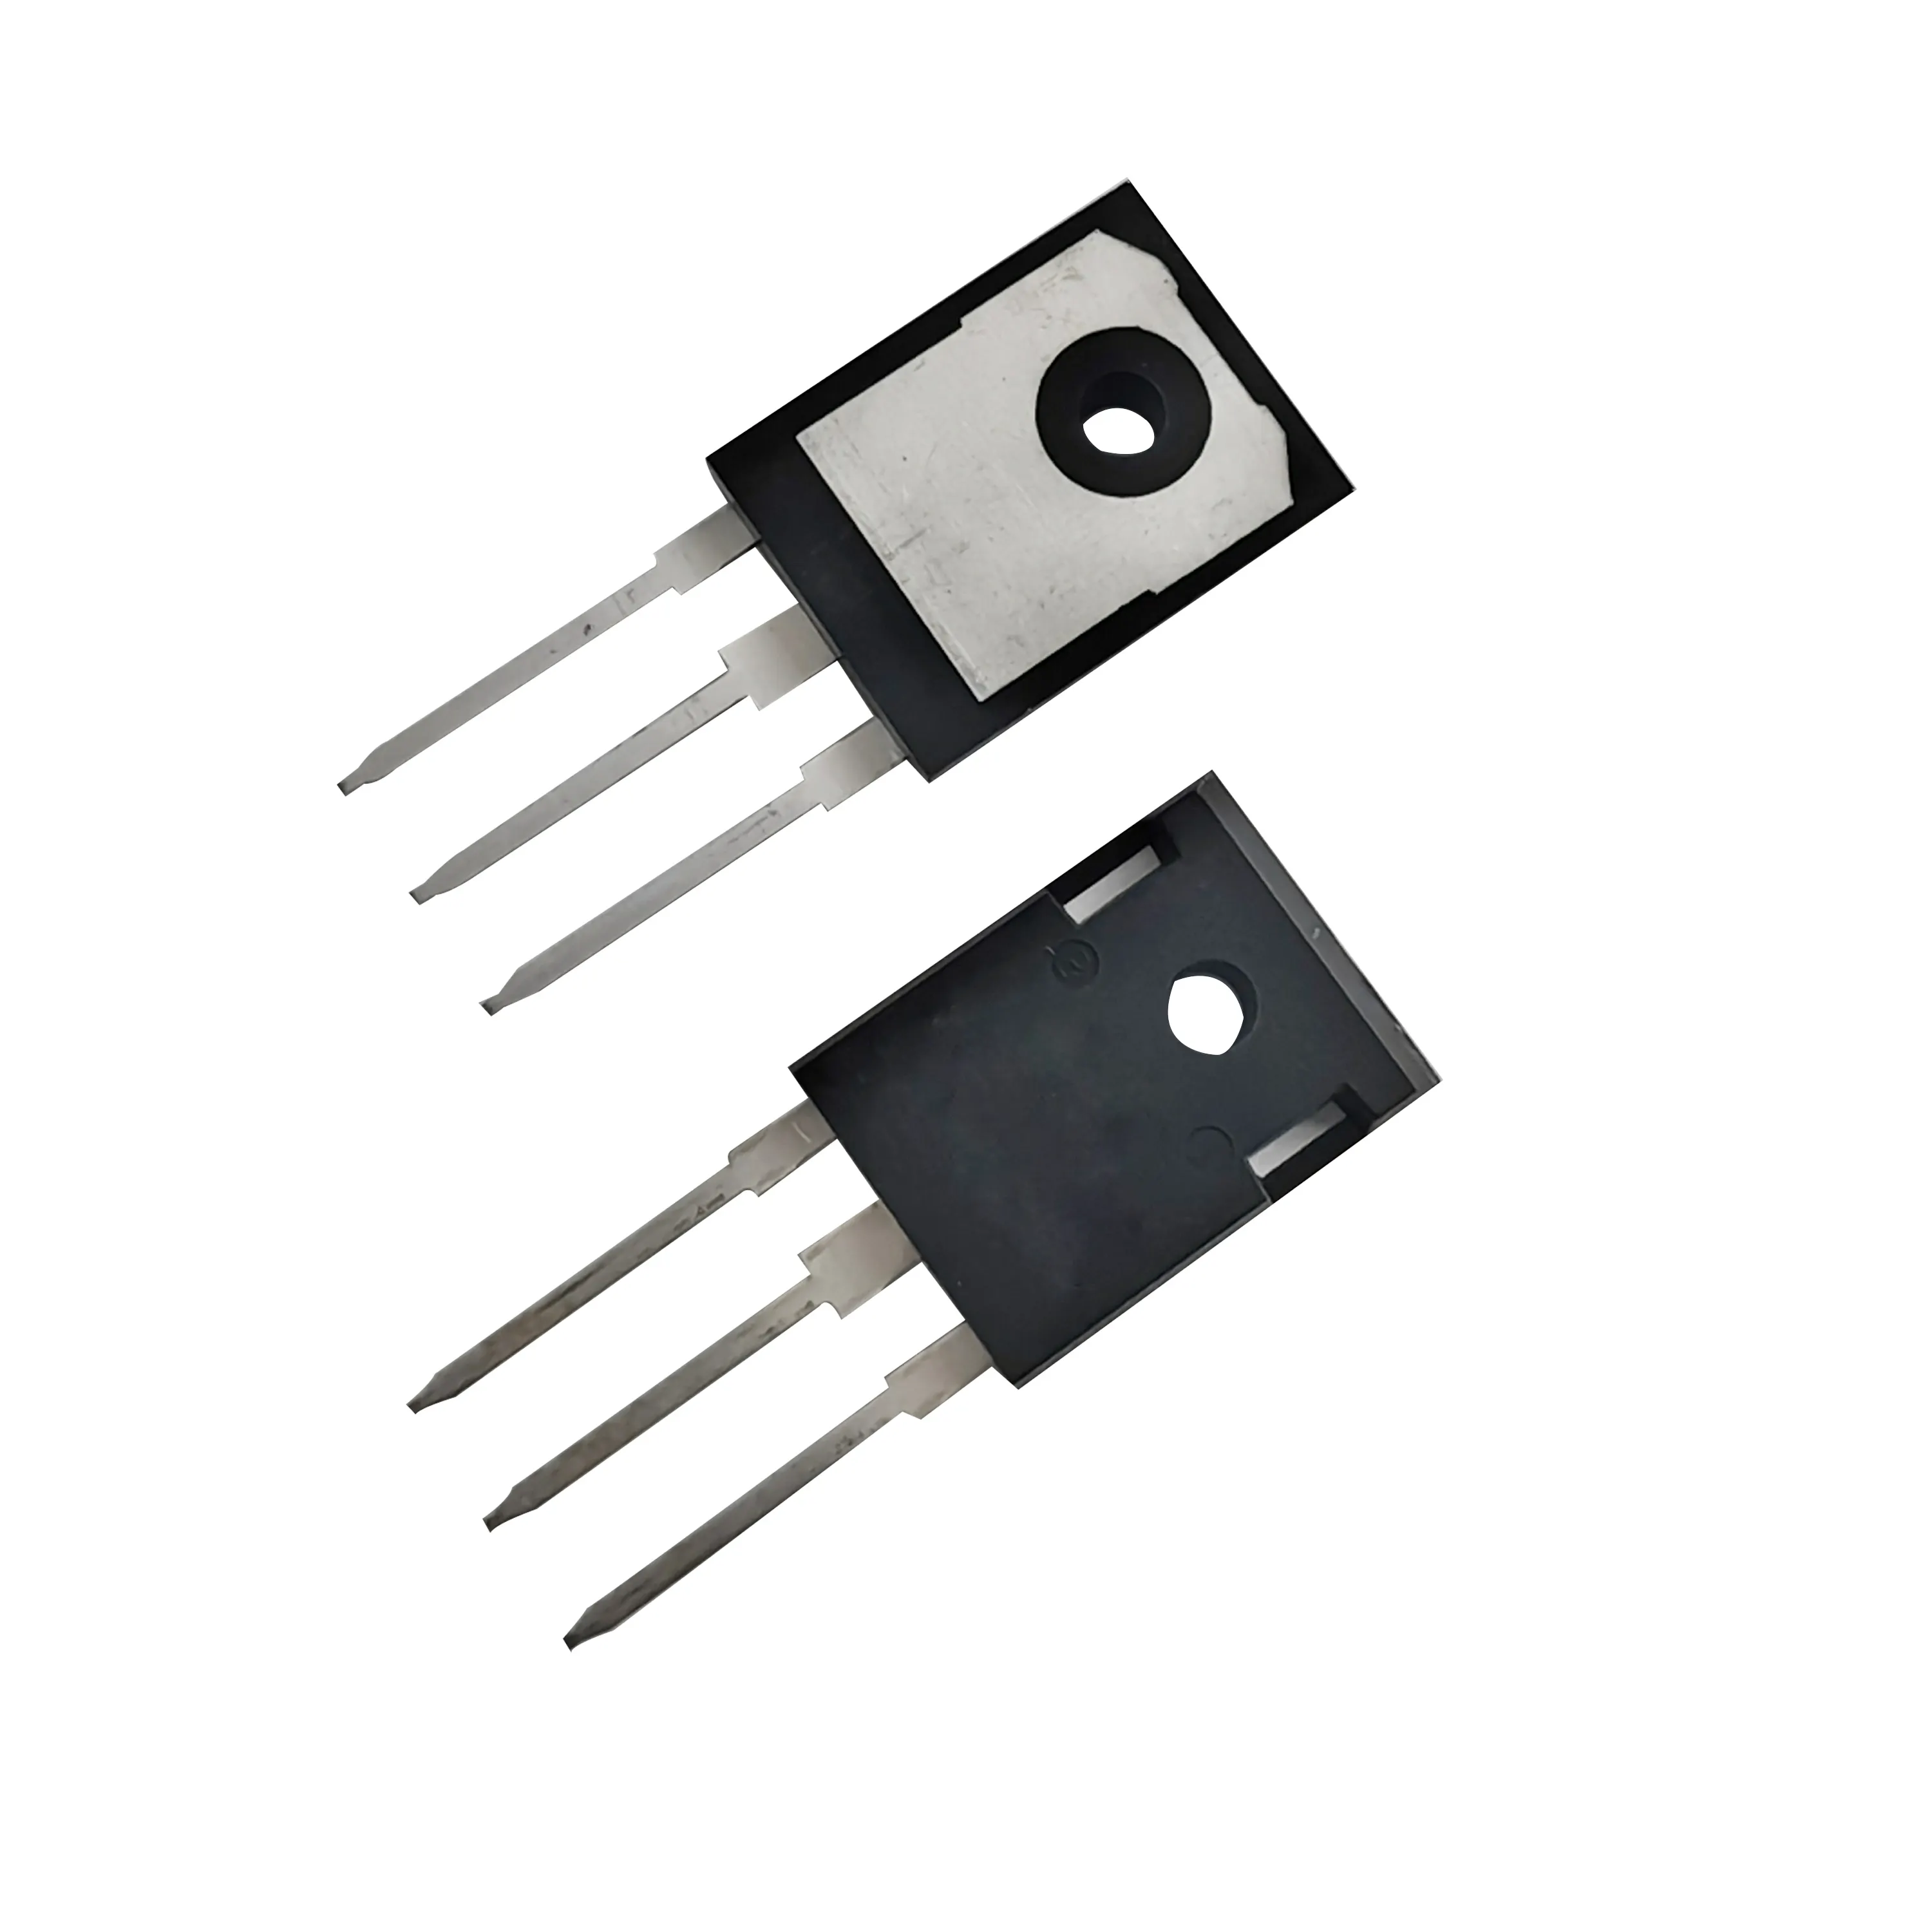 IGBT Transistor 650V 100A With Positive Temperature Coefficient SiC Schottky Barrier Diode For Solar Inverter